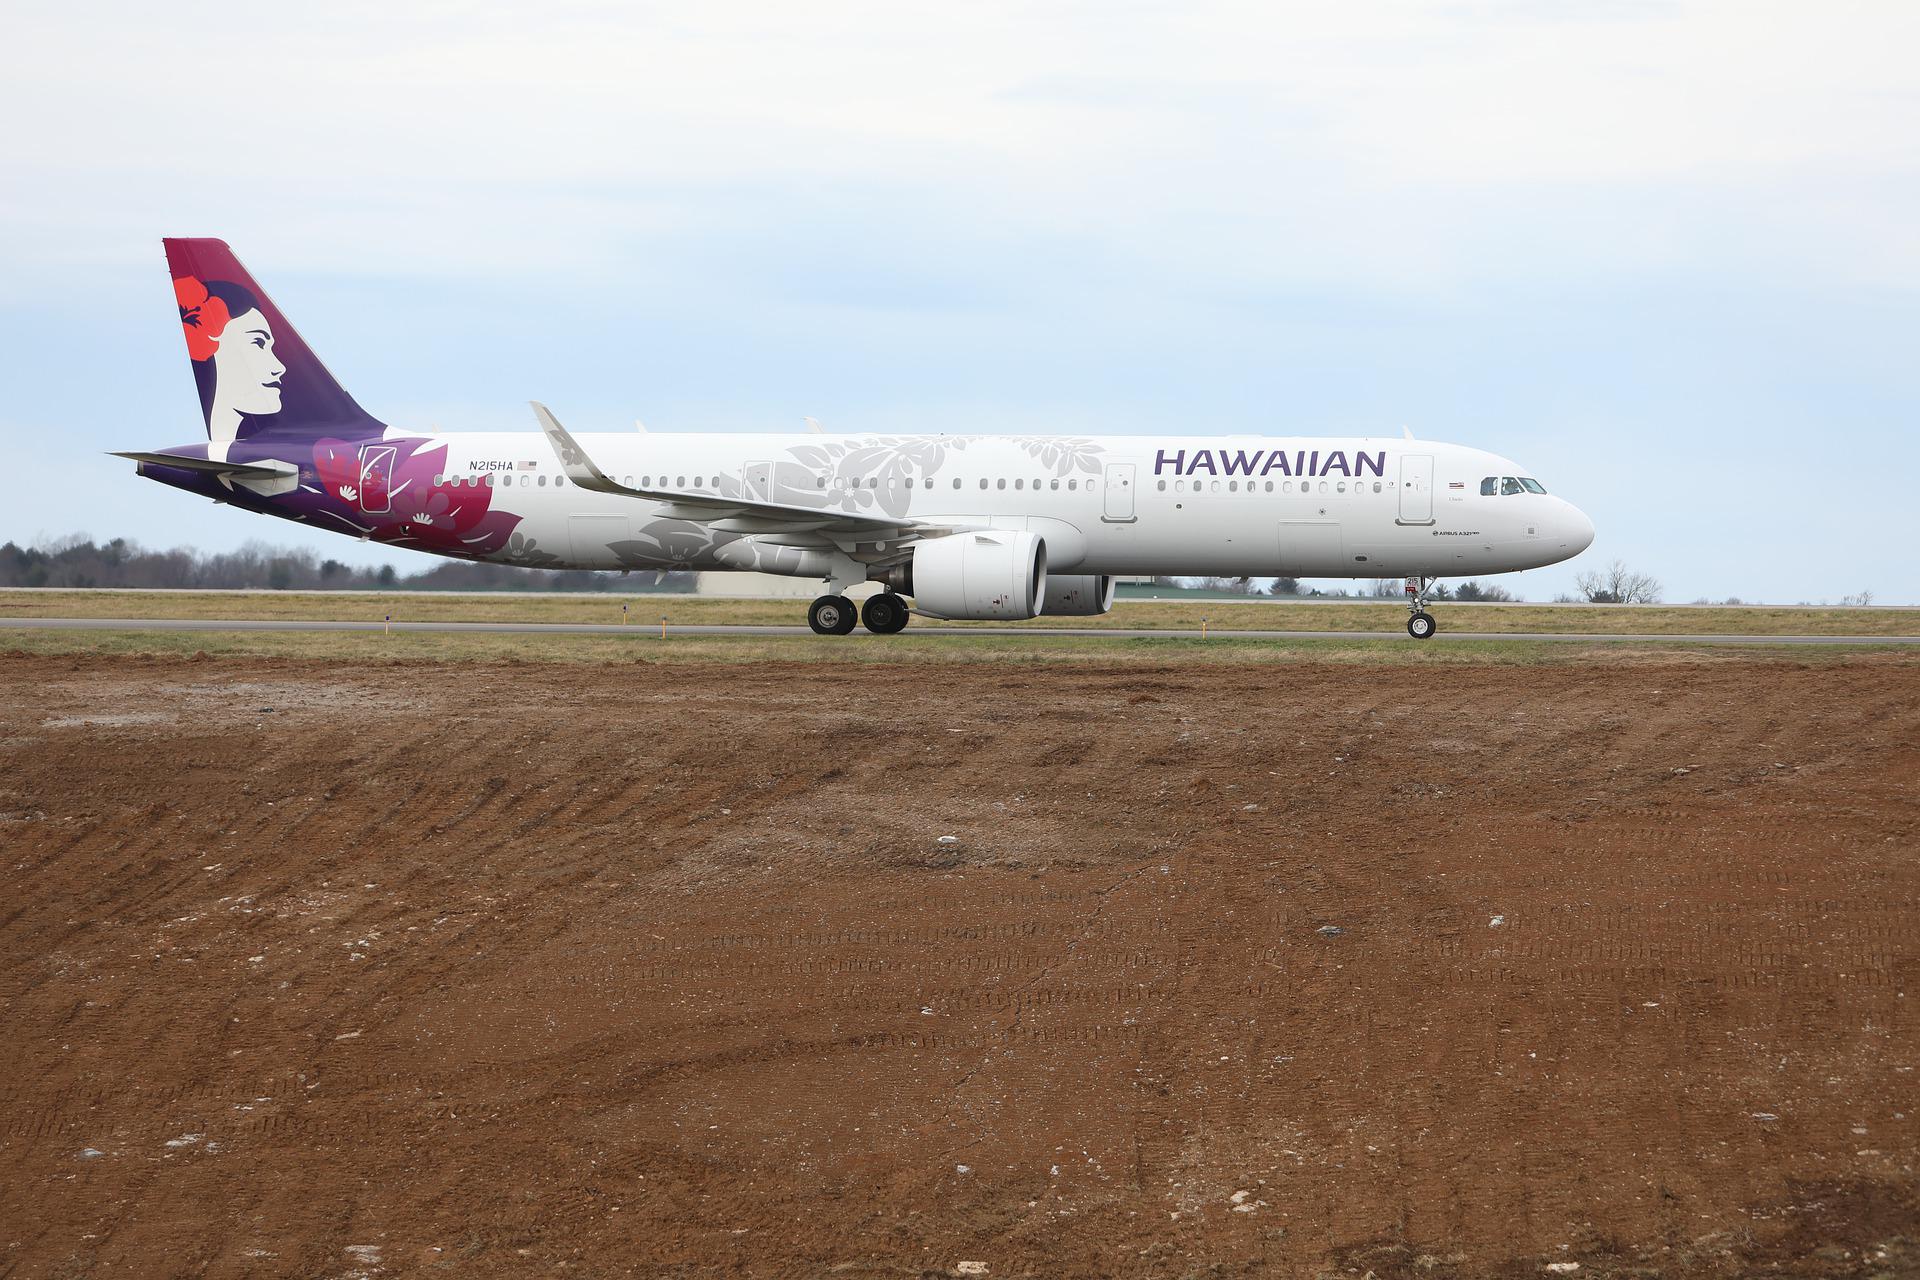 Hawaiian airlines aircraft with branding livery: Pualani face on the tailfin of an aircraft with Hawaiian written on the fuselage.